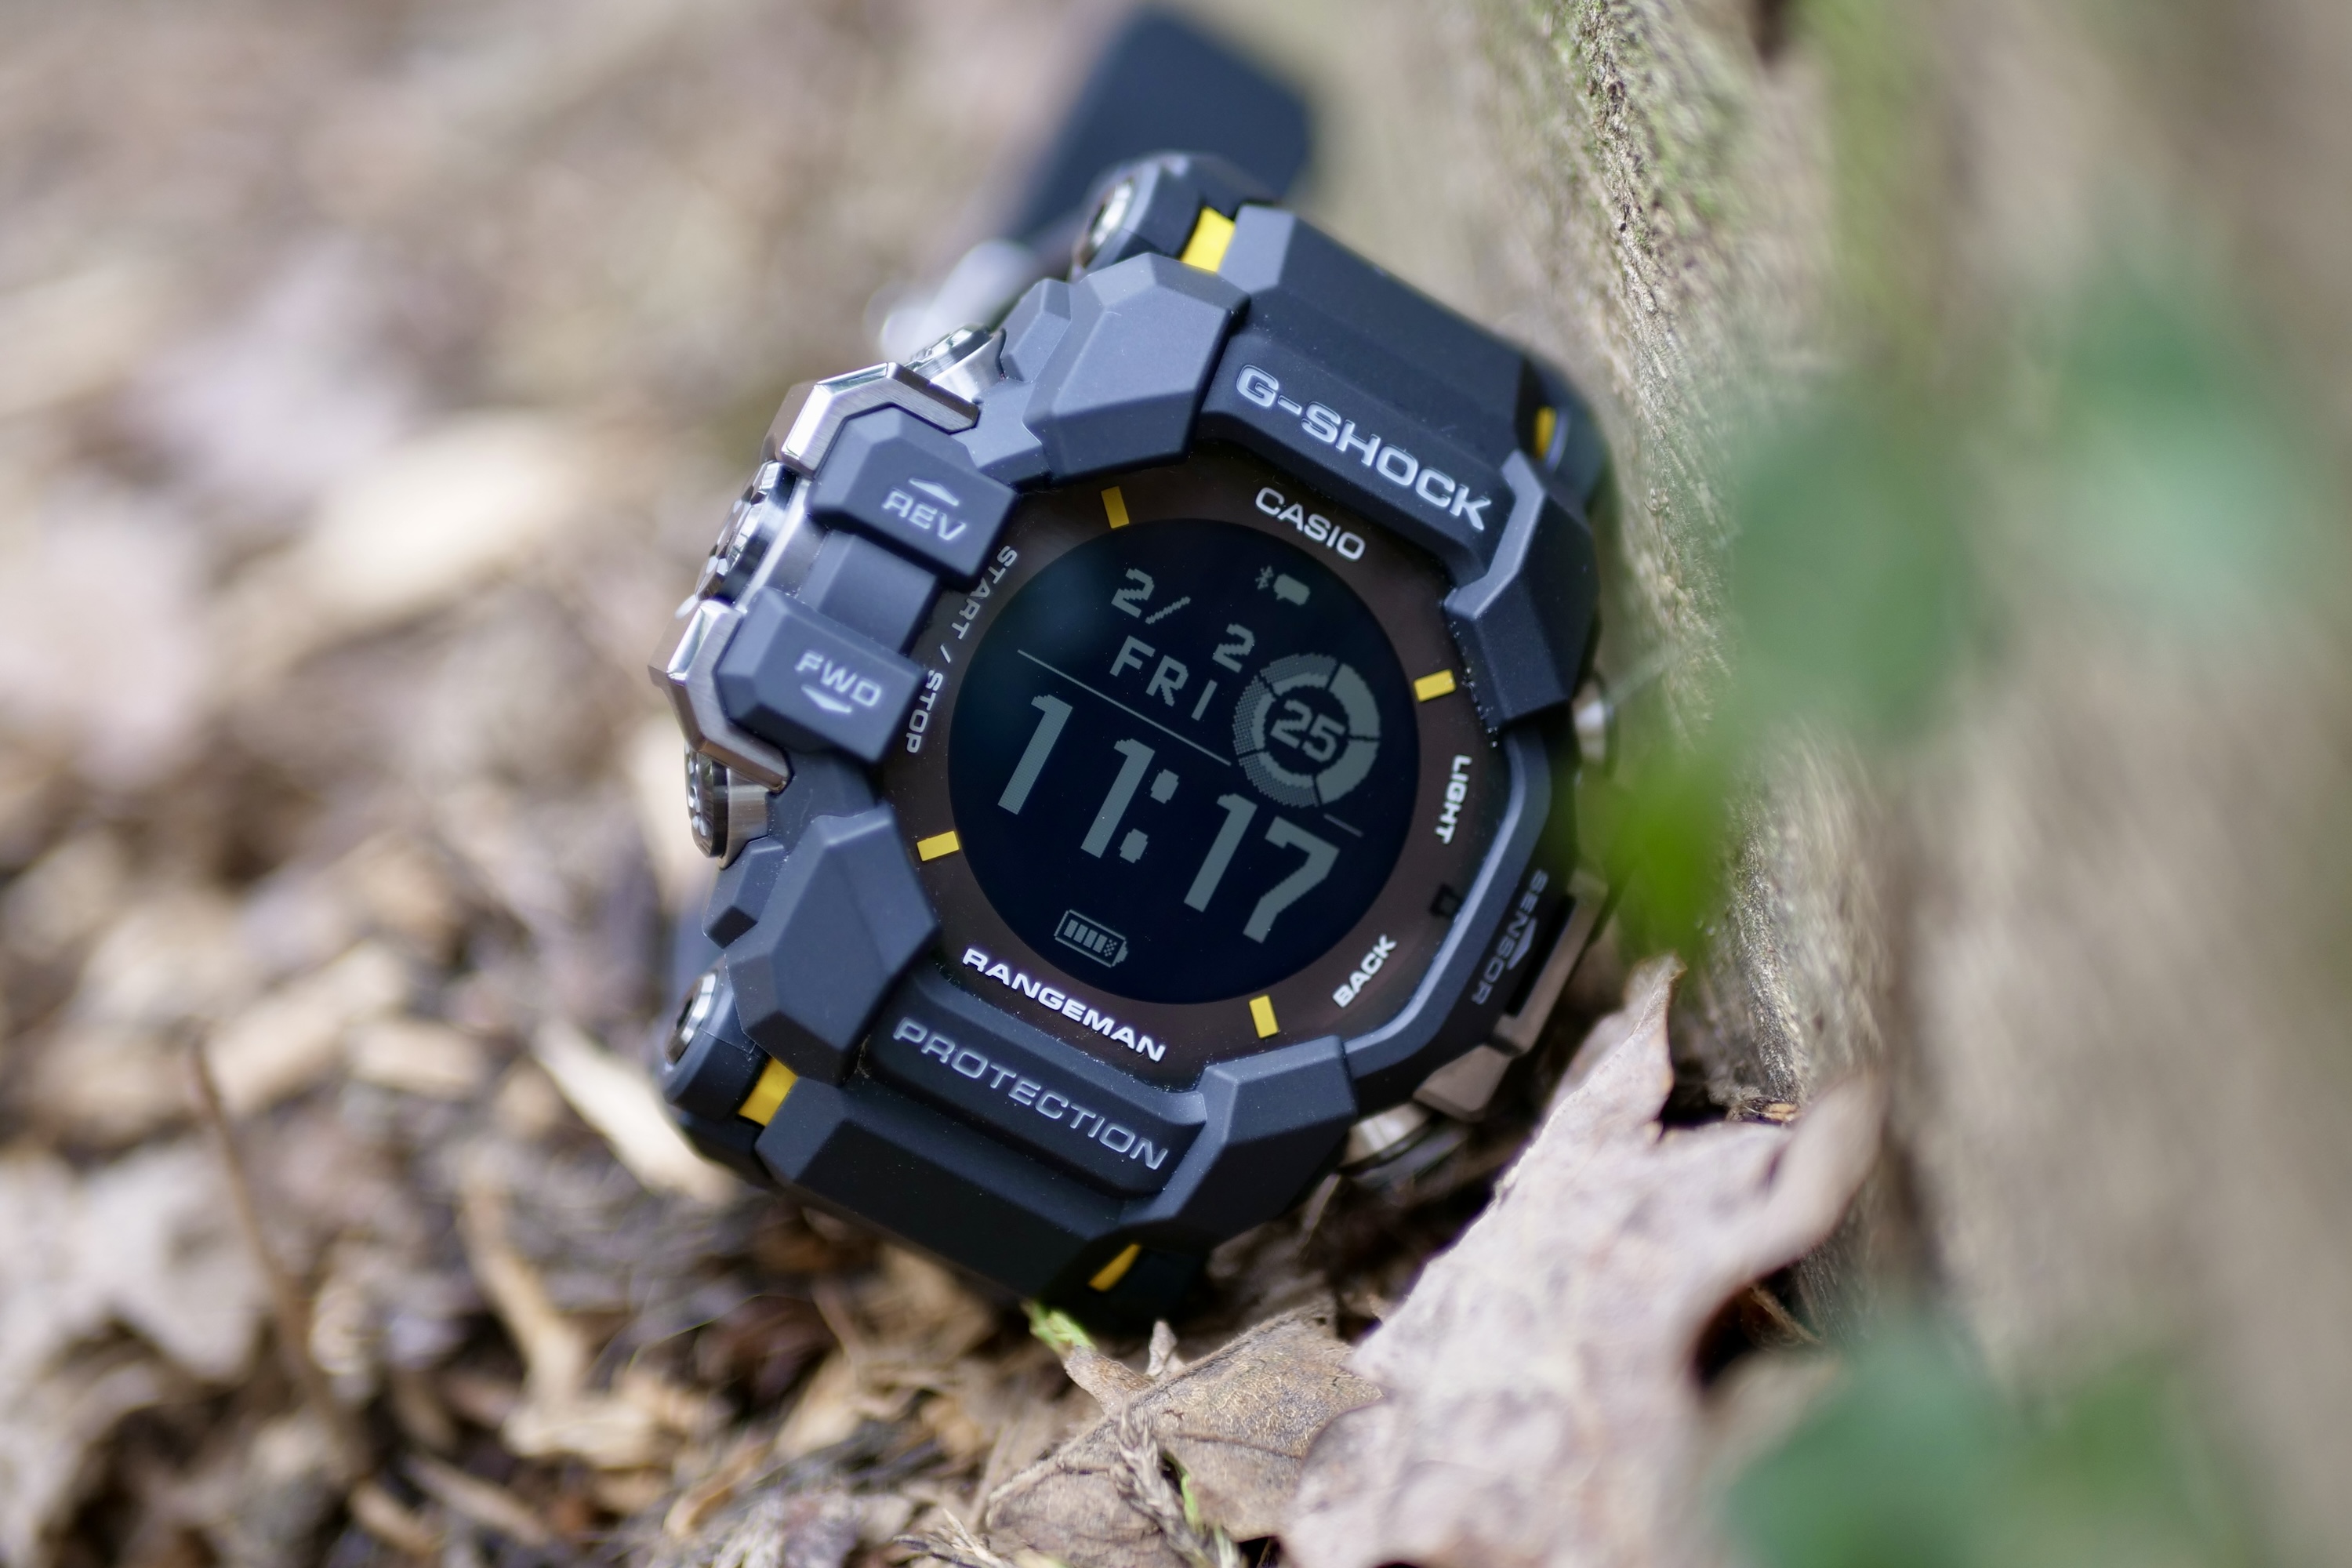 Reloj G-SHOCK modelo GPR-H1000-1ER marca Casio Hombre — Watches All Time